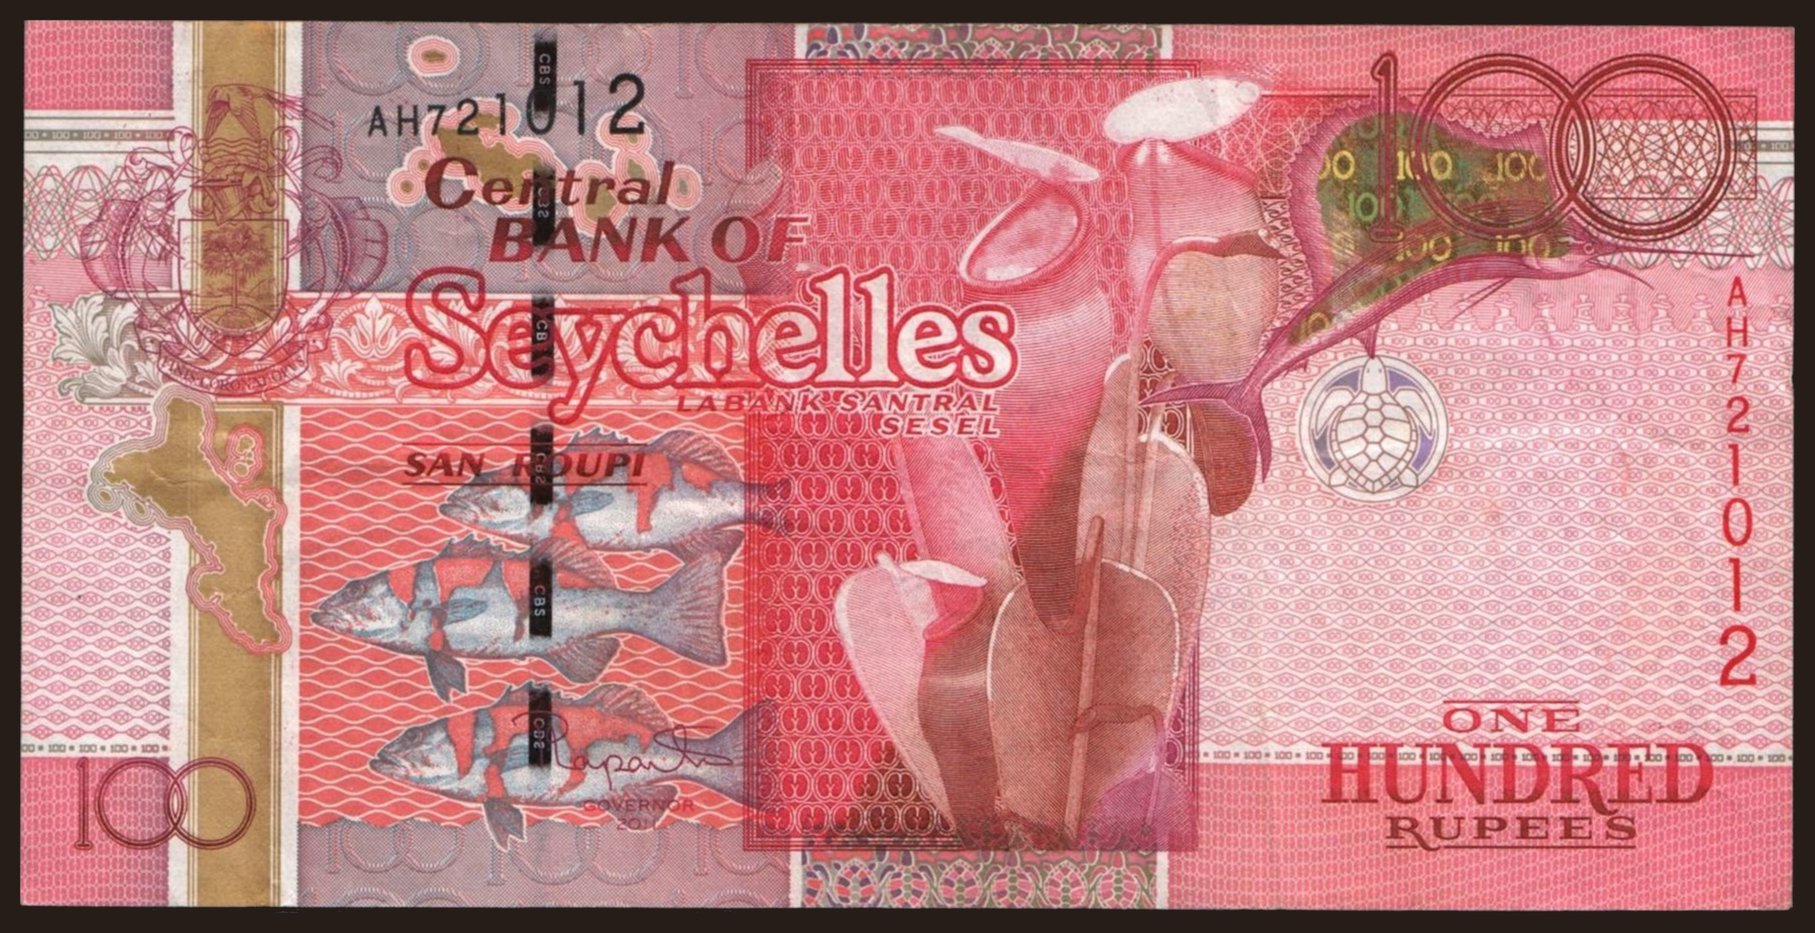 100 rupees, 2011